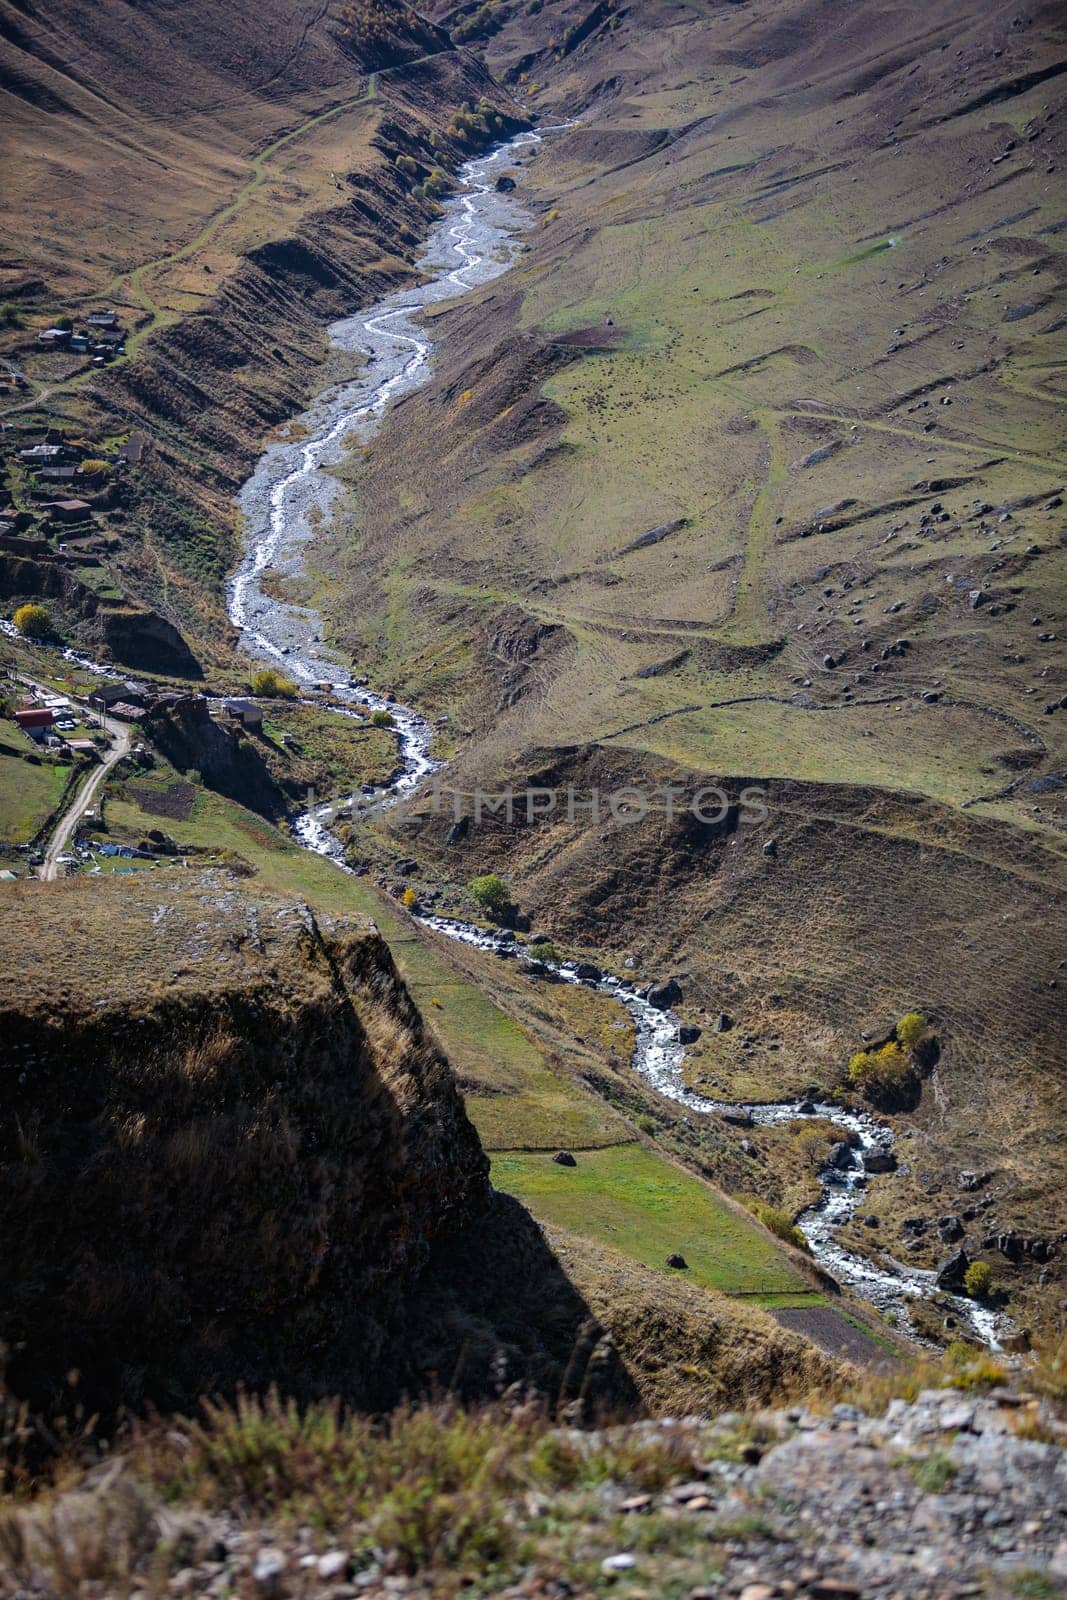 Panoramic view of the winding mountain river from above, the beauty and power of nature by Yurich32